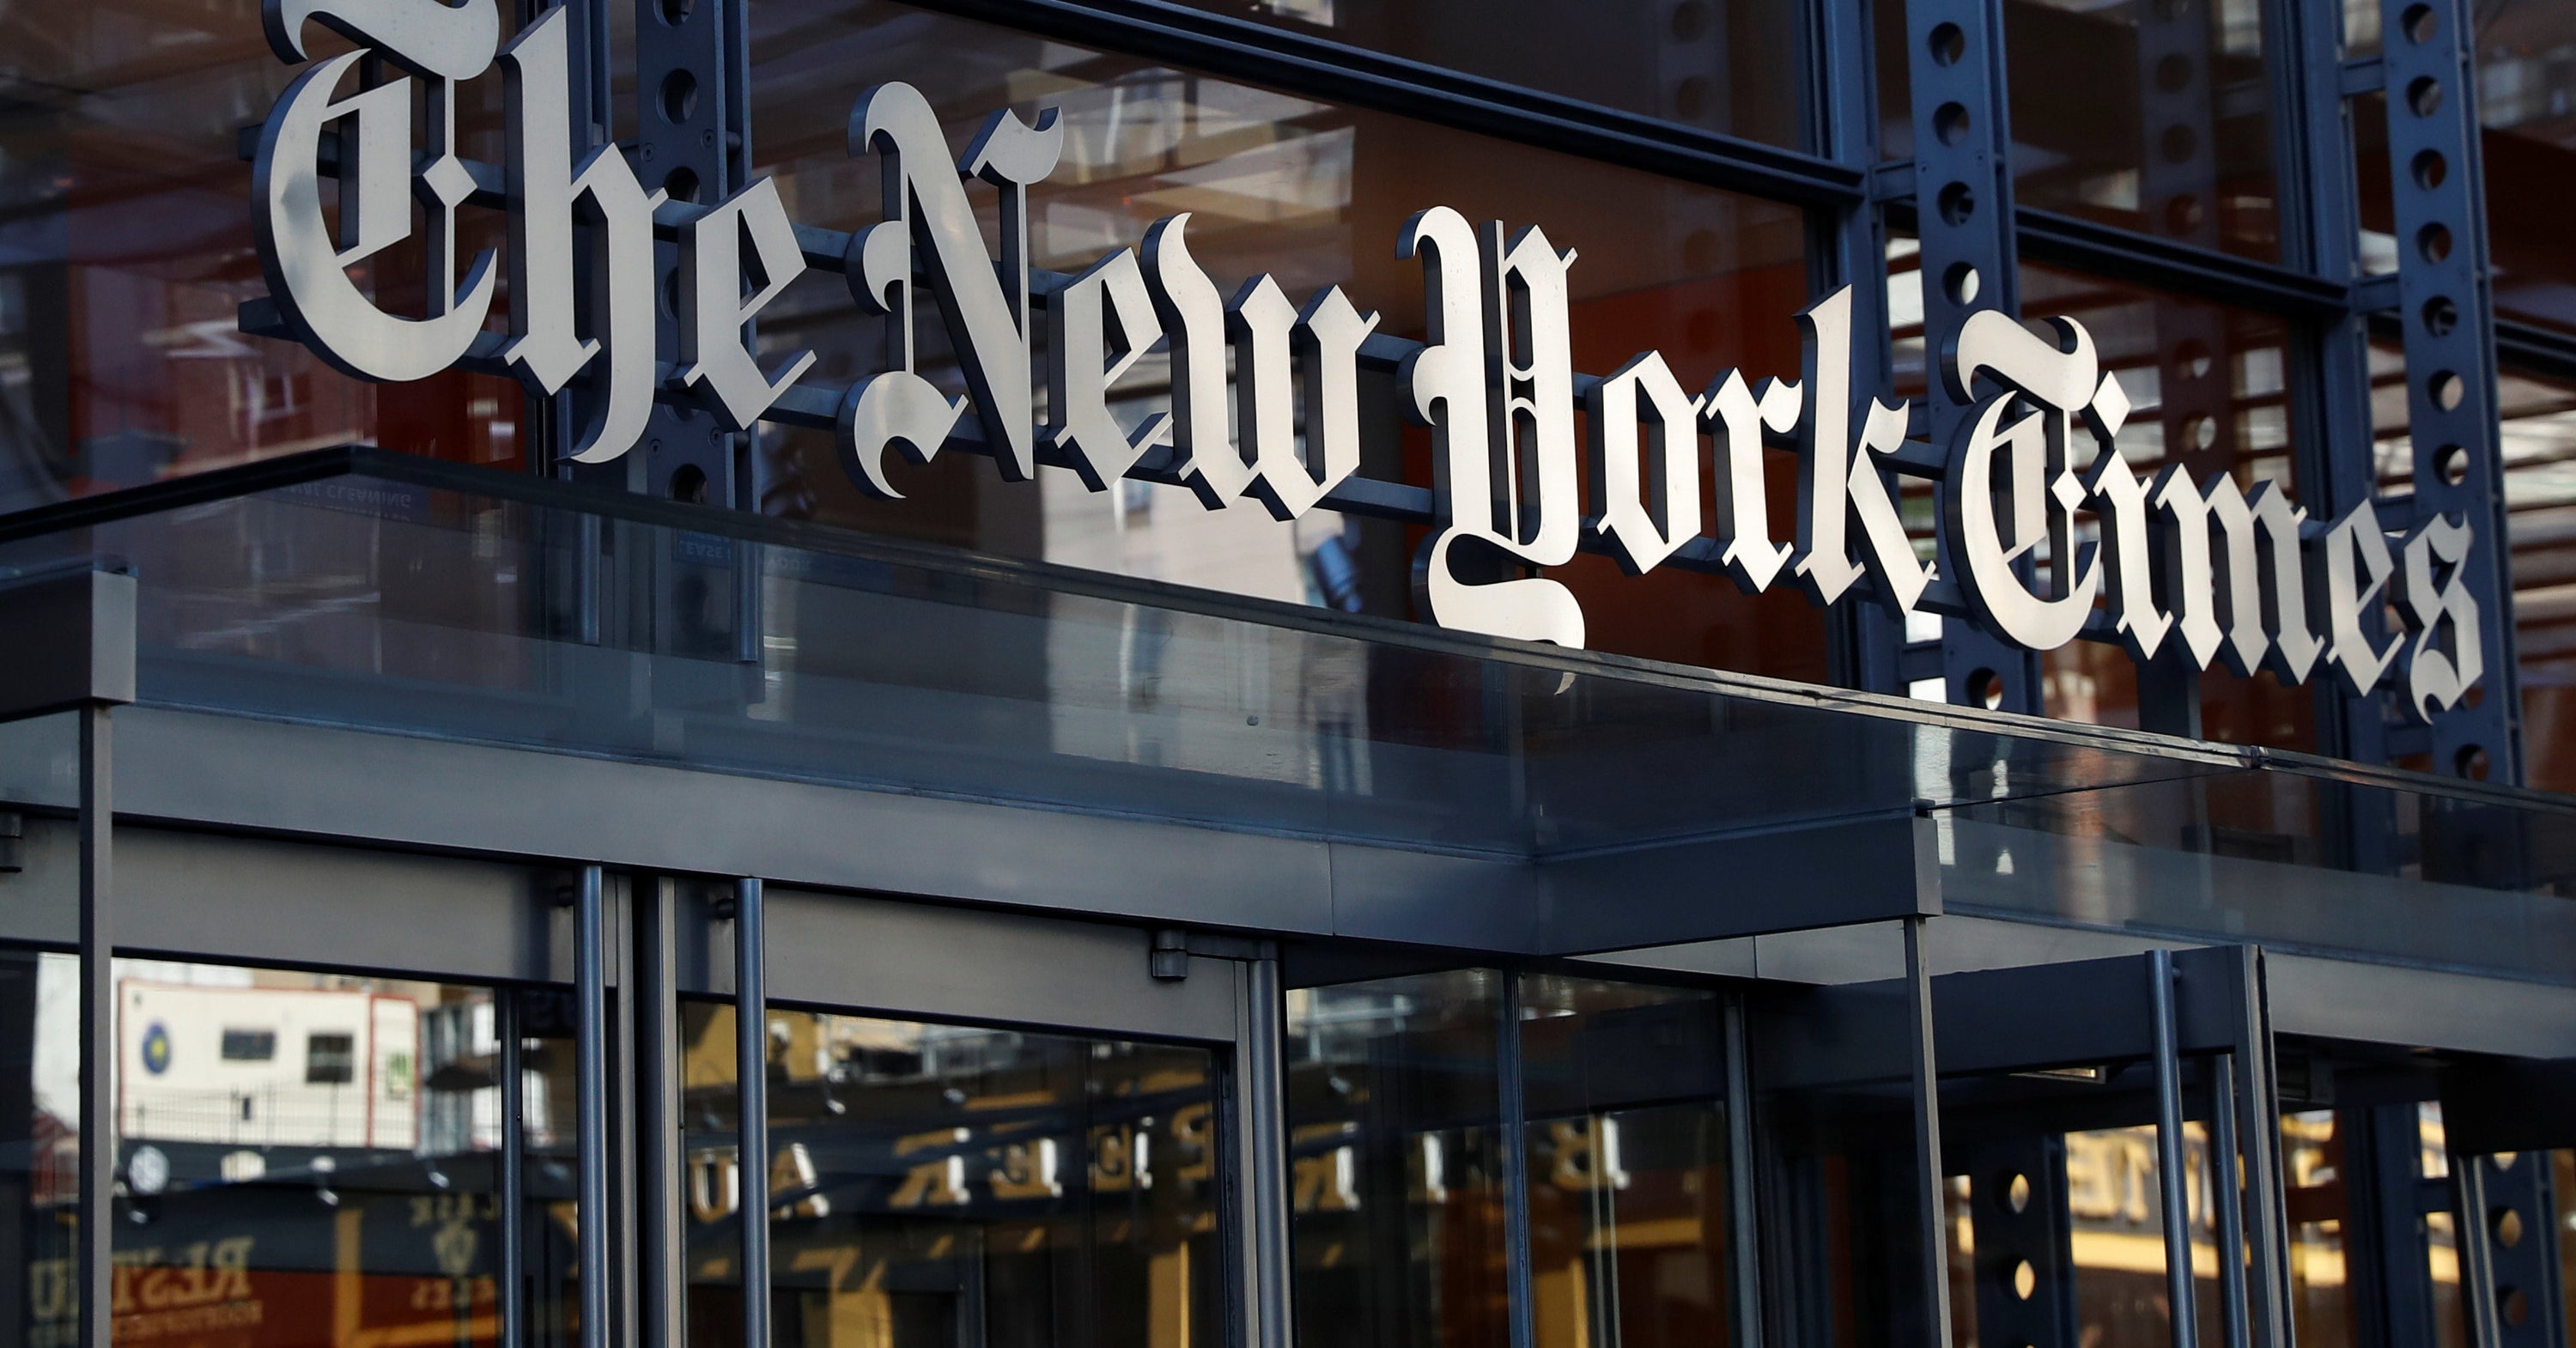 The New York Times Is Abandoning Its Cooking Community Facebook Group